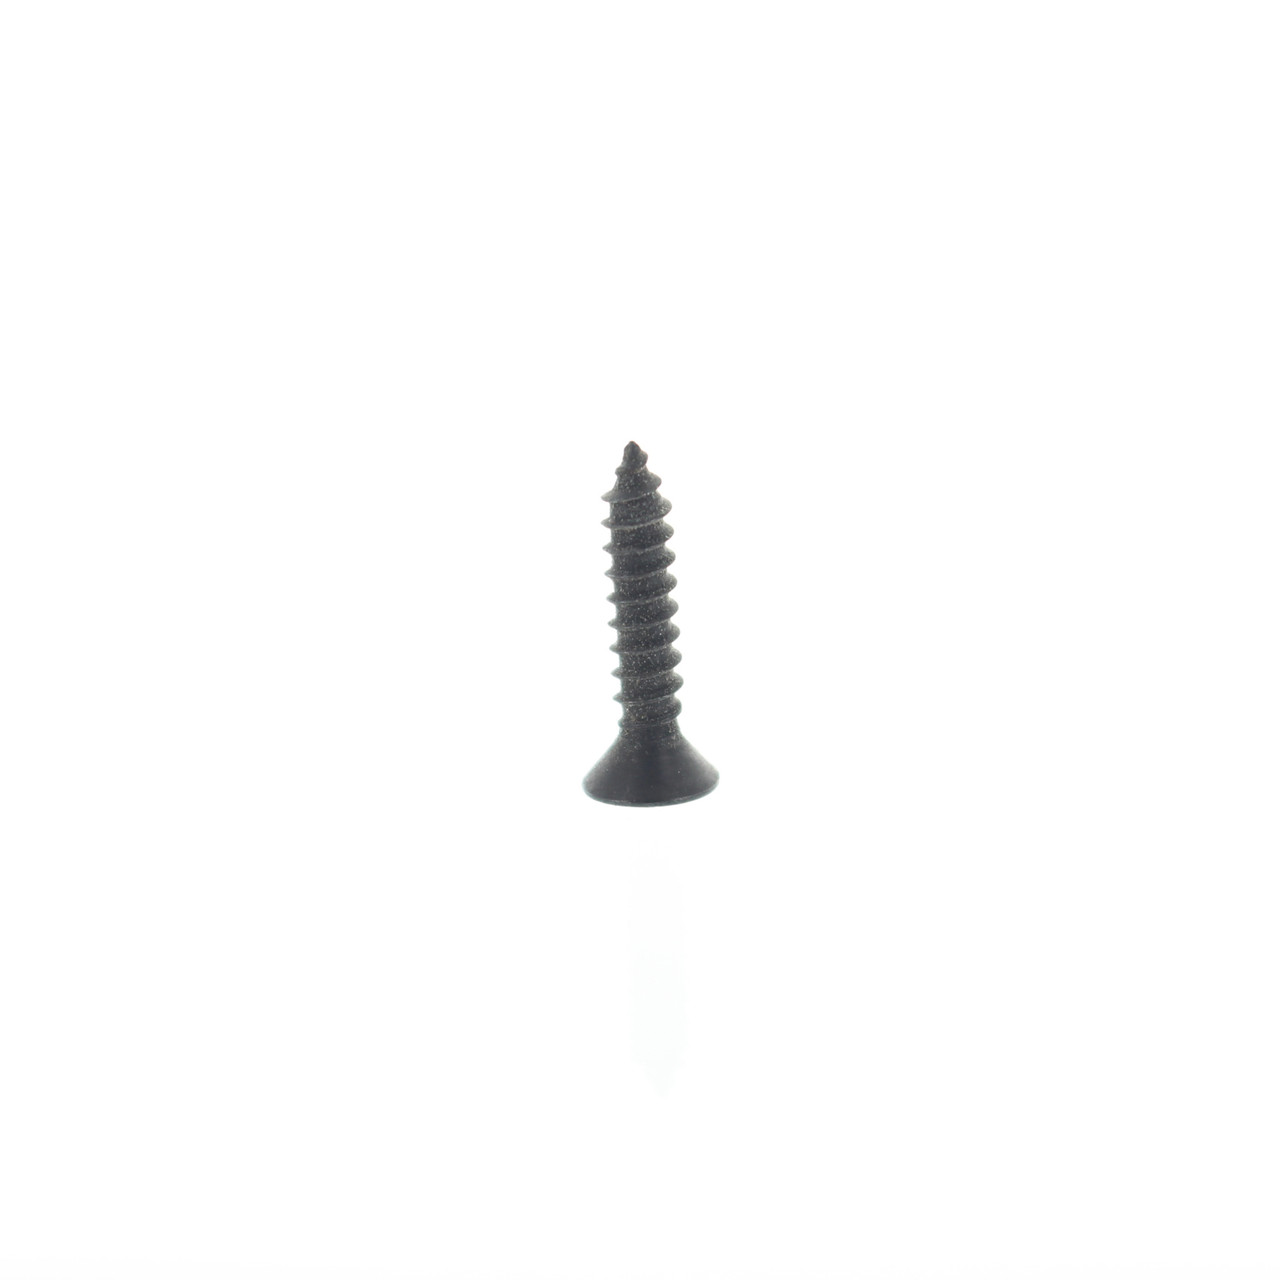 Sea-Doo New OEM Tapping Screw M3.5x19, Pack of 100, 250000092